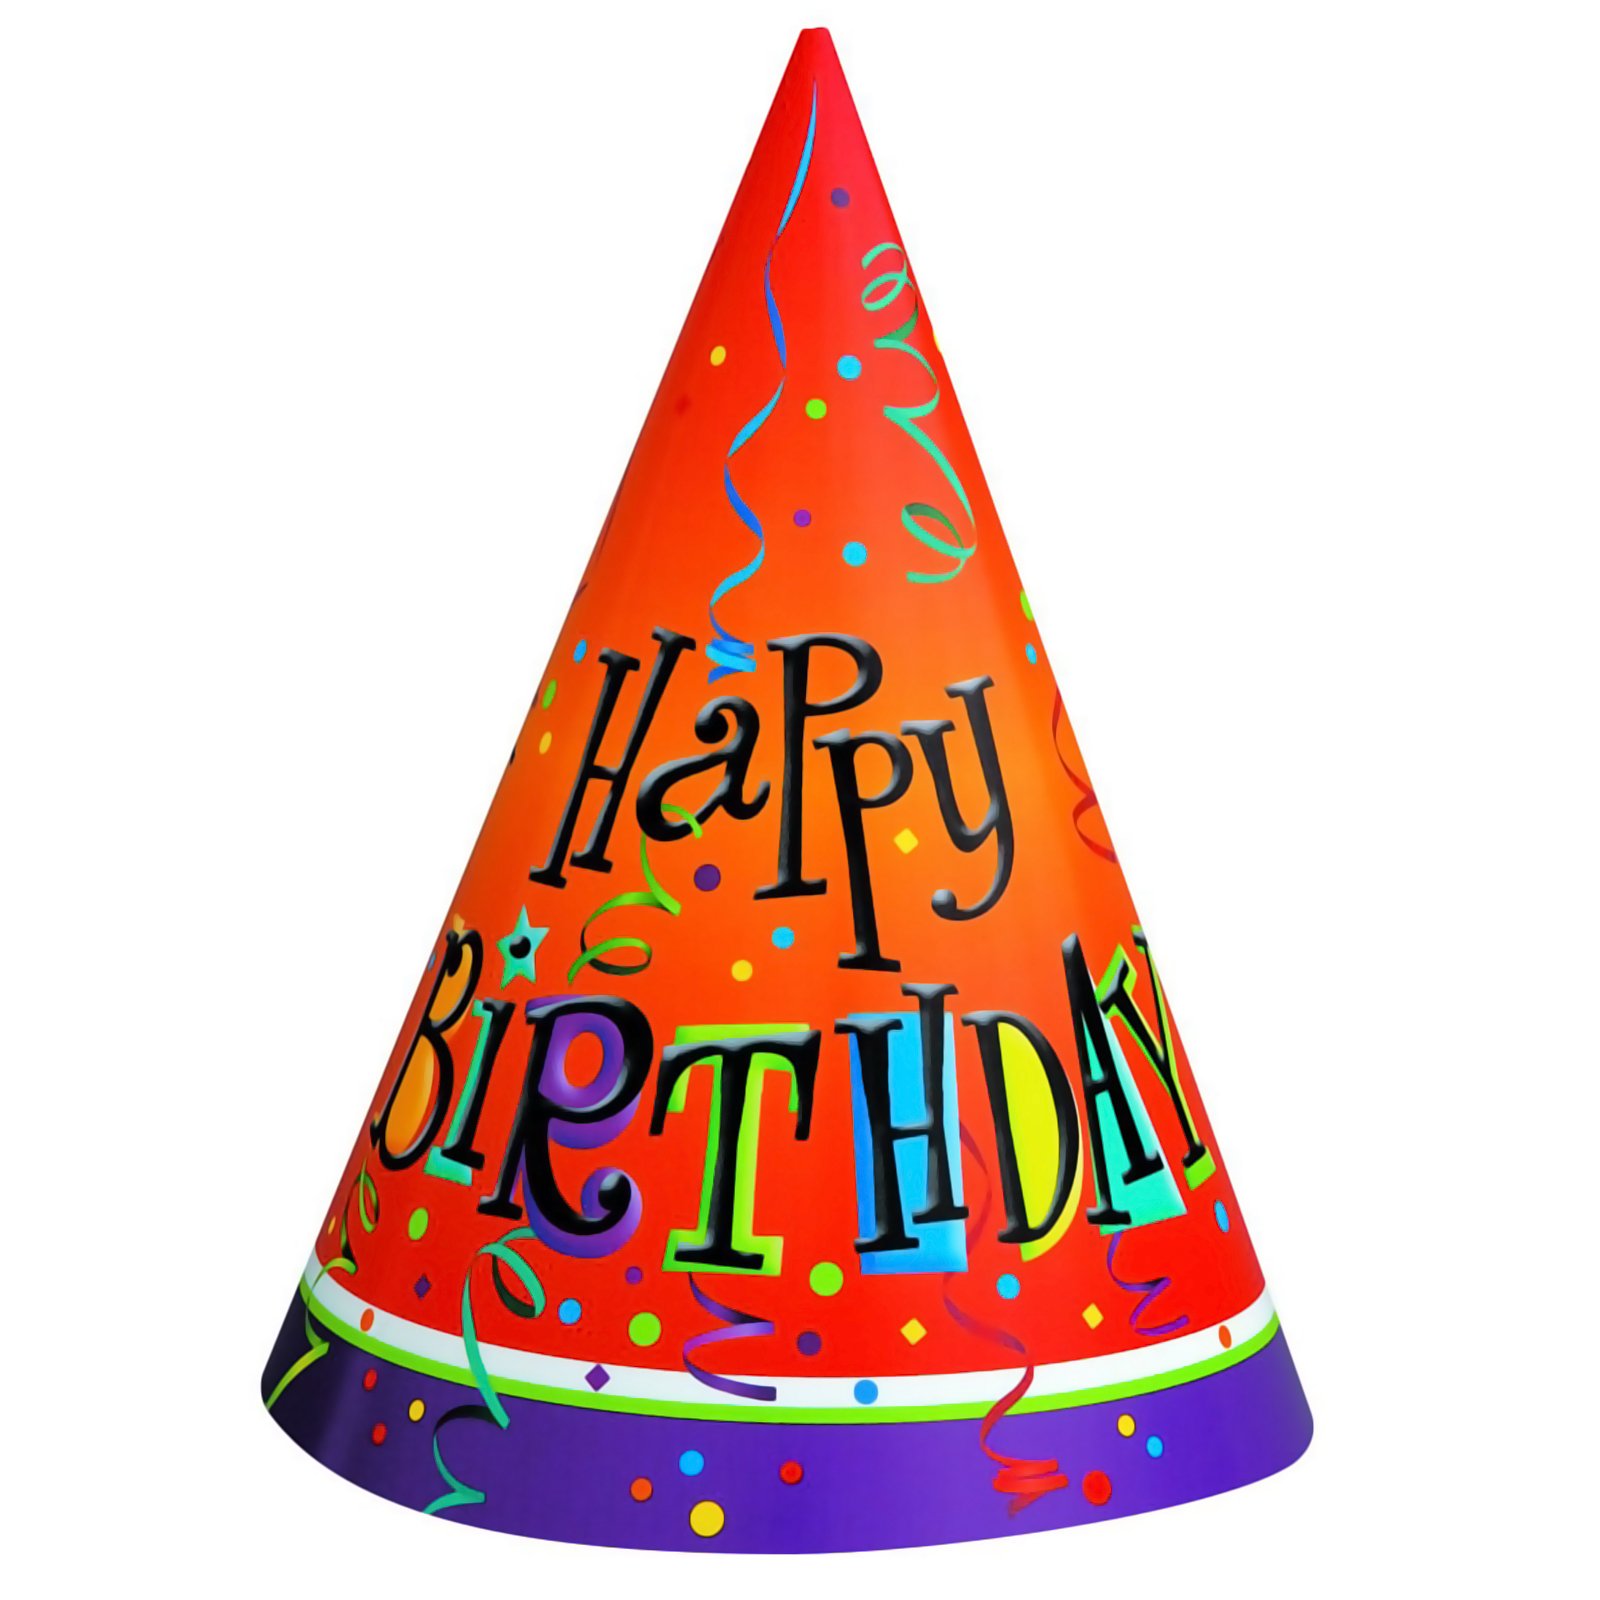 Birthday Hat Transparent Background   Clipart Panda   Free Clipart